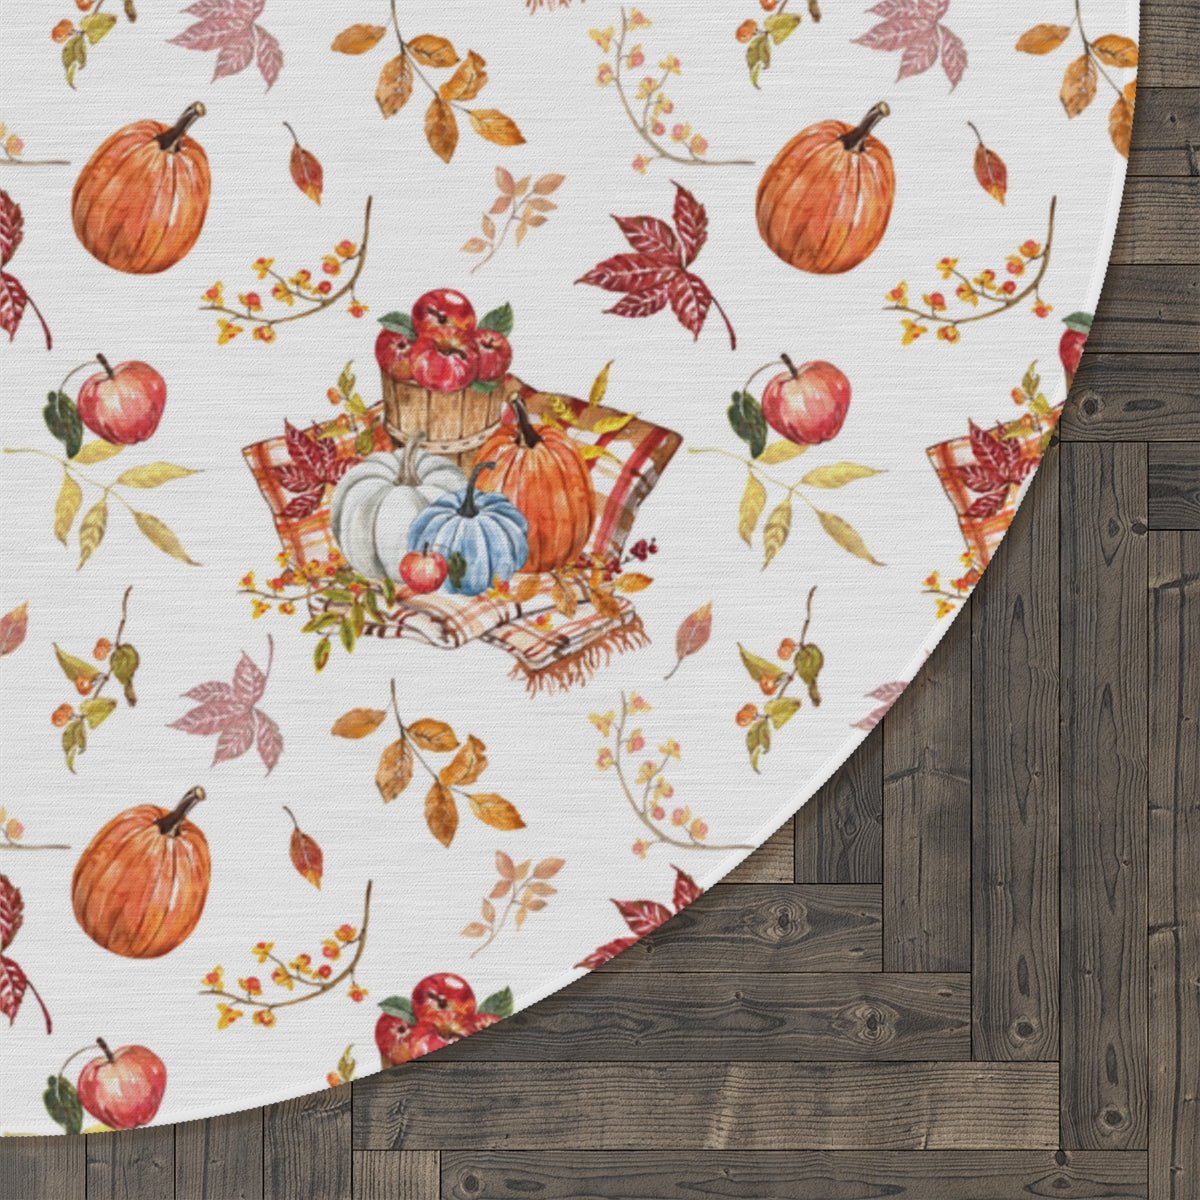 Fall Pumpkins and Apples Round Rug - Puffin Lime